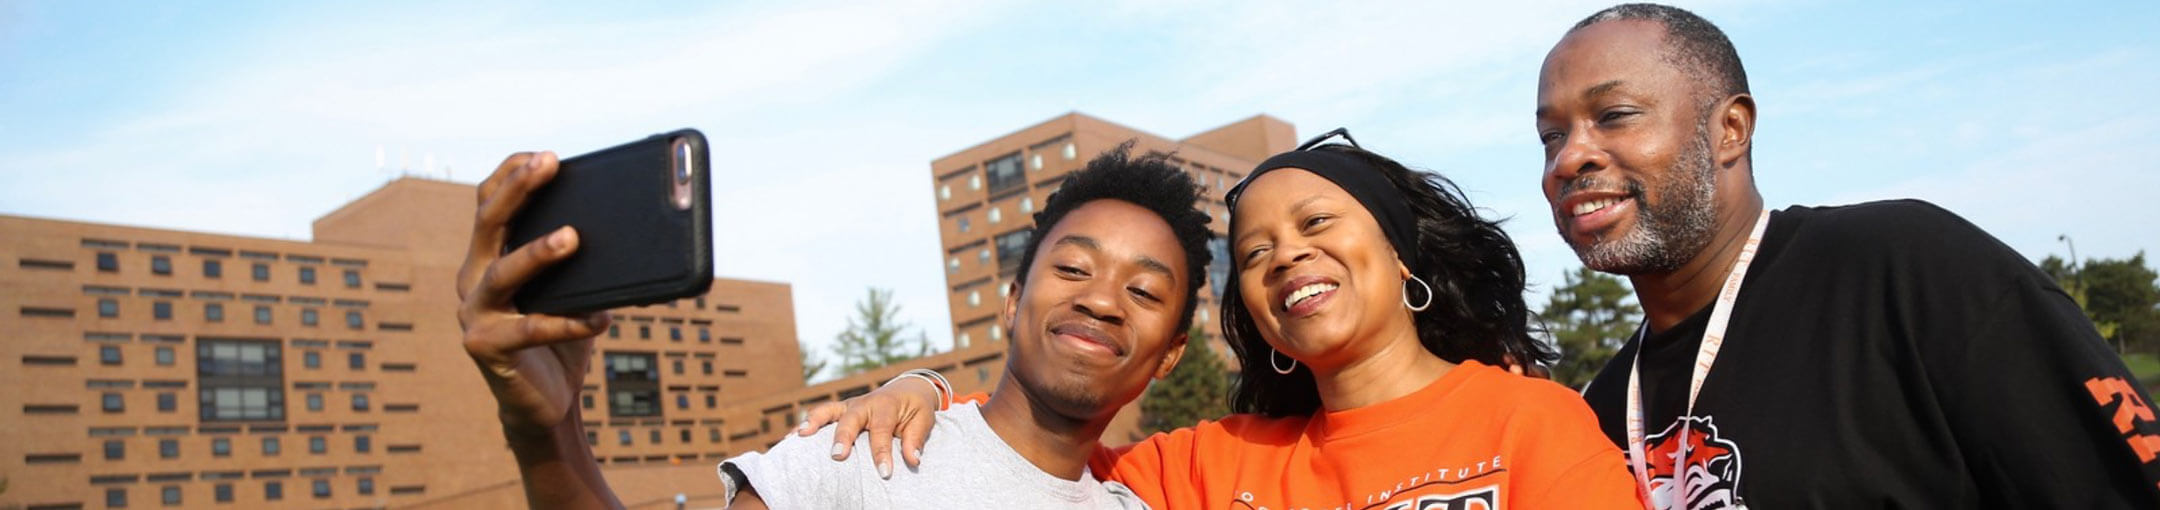 A family taking a selfie during orientation at RIT.